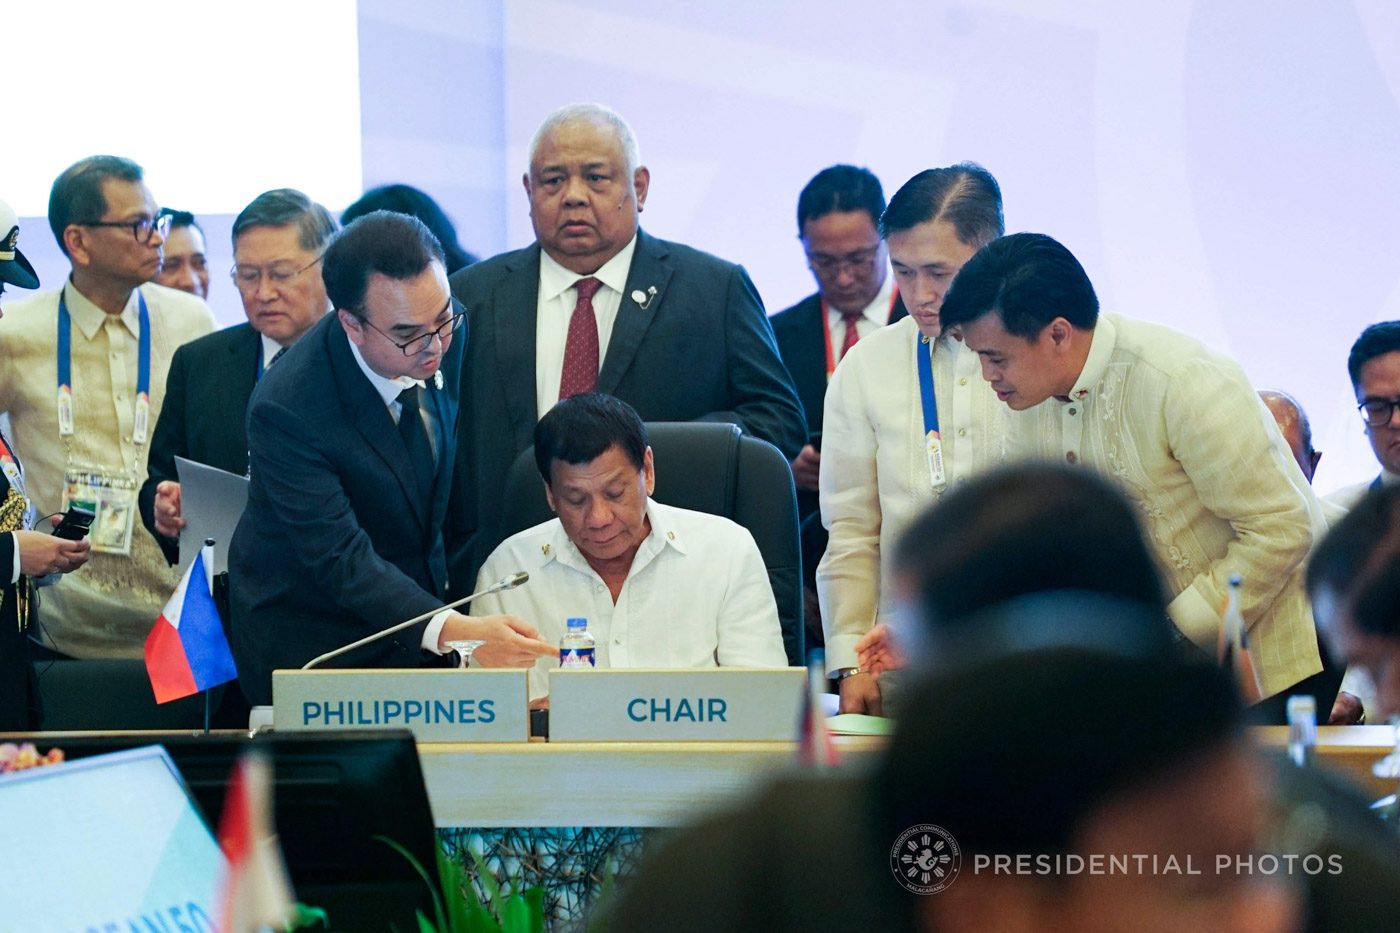 Duterte frustrated with int’l summits: ‘They can’t accomplish anything’